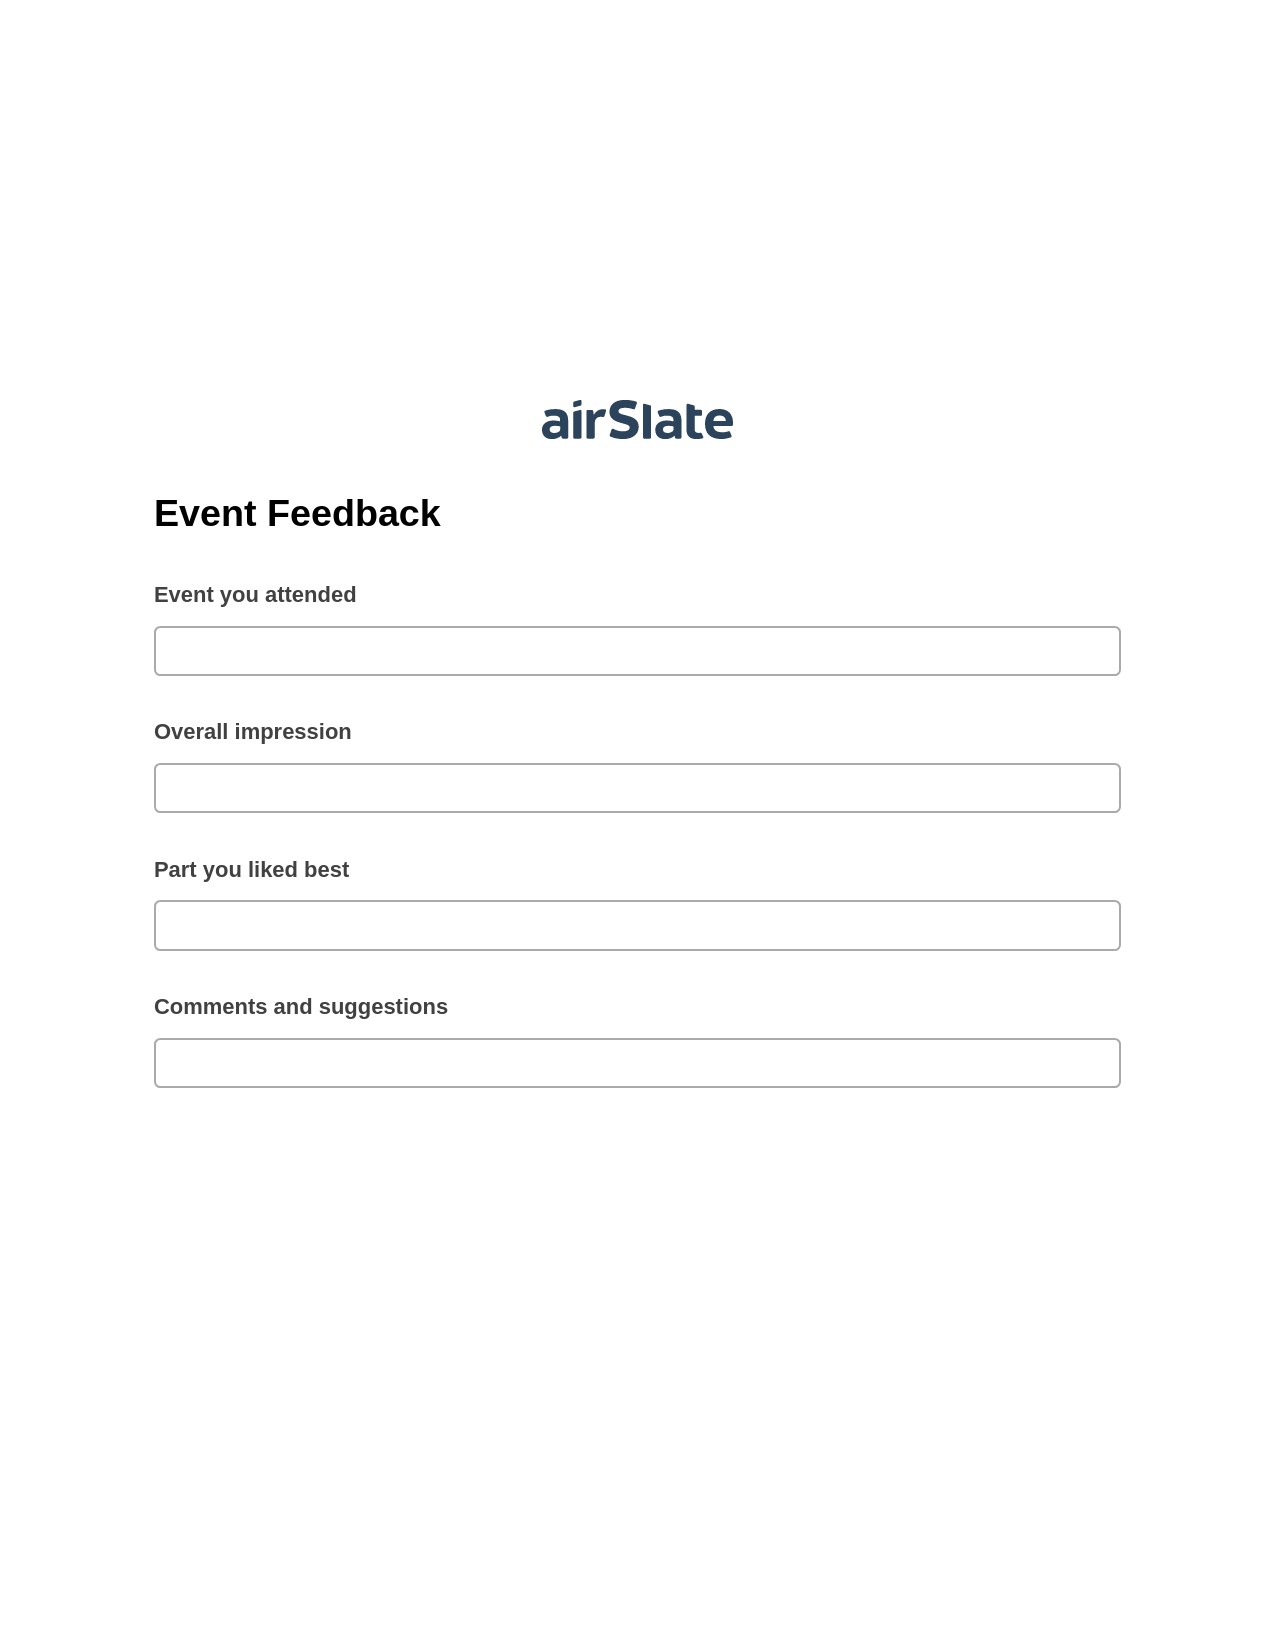 Event Feedback Pre-fill from NetSuite Records Bot, Audit Trail Bot, Archive to SharePoint Folder Bot